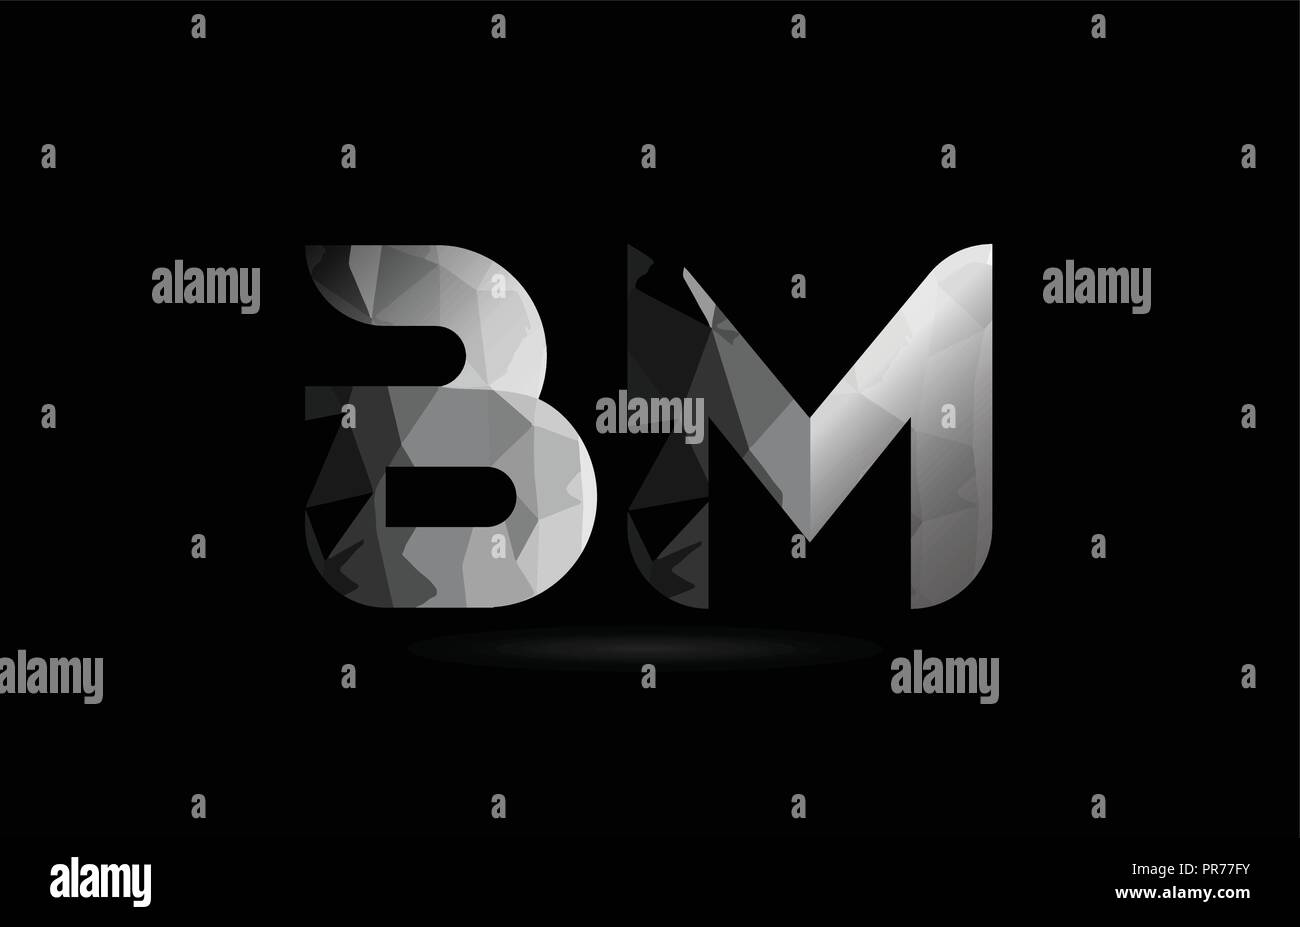 black and white alphabet letter bm b m logo combination design suitable for a company or business Stock Vector